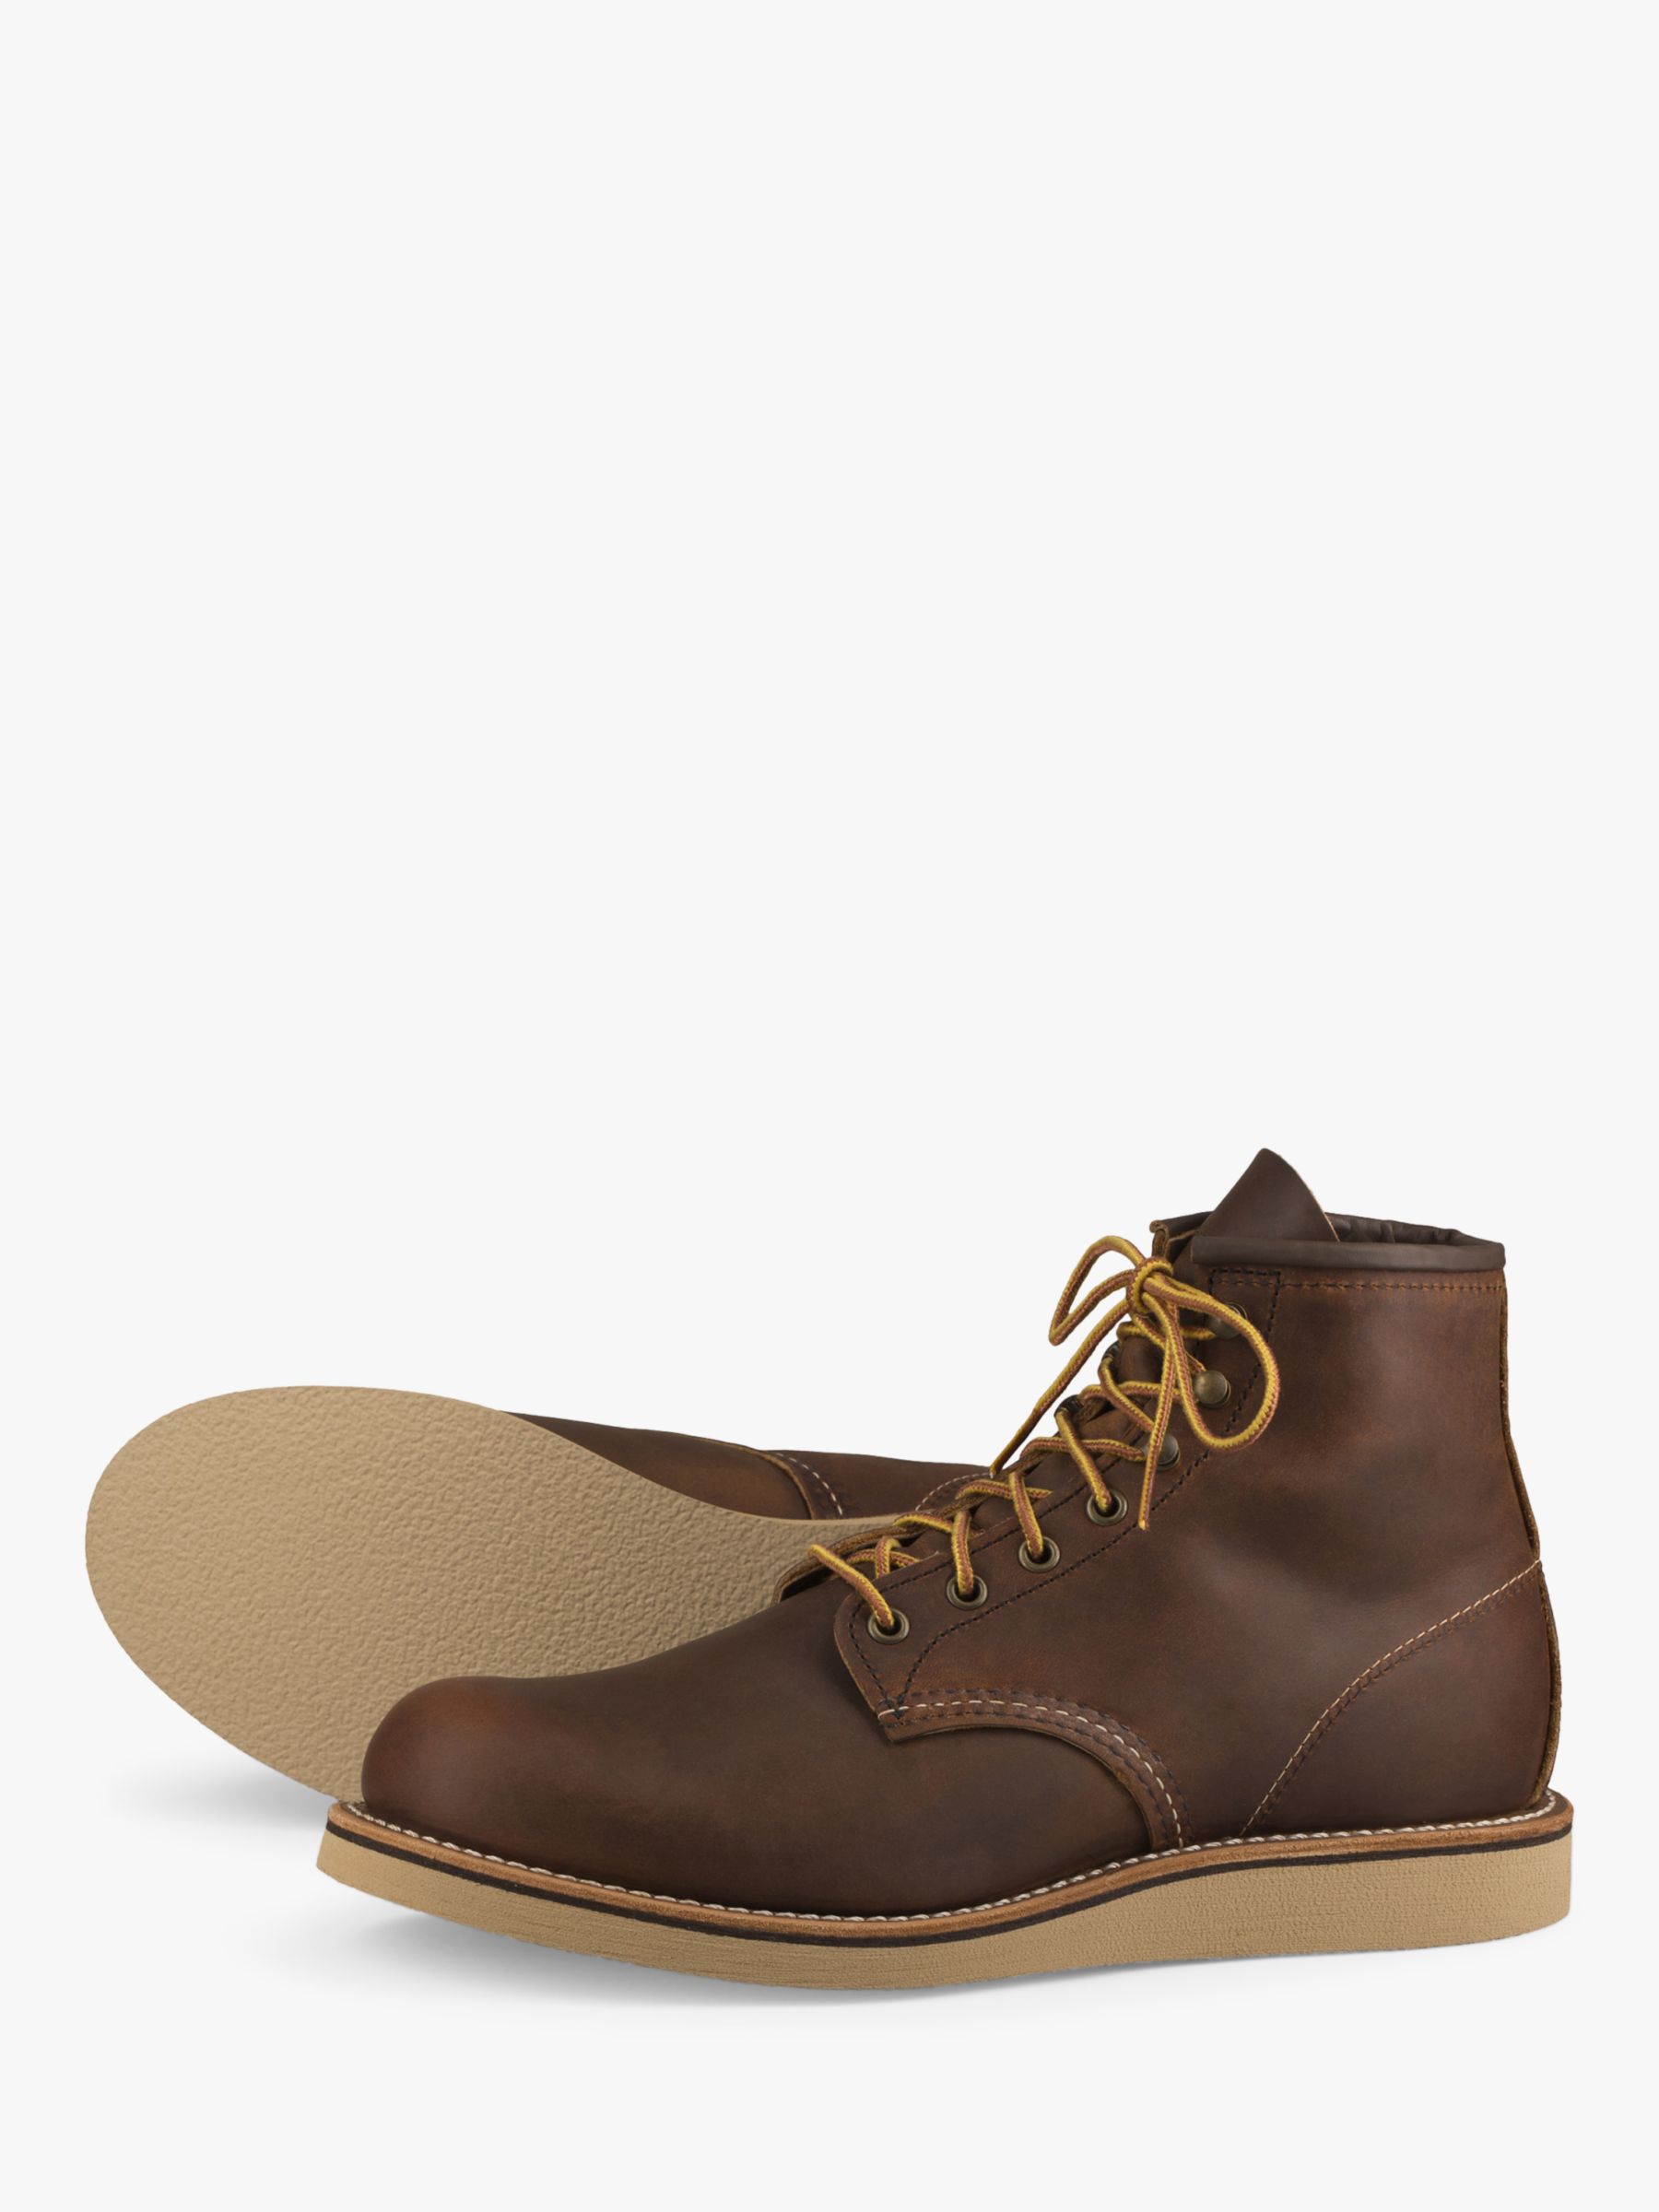 red wing boots coupons 2019